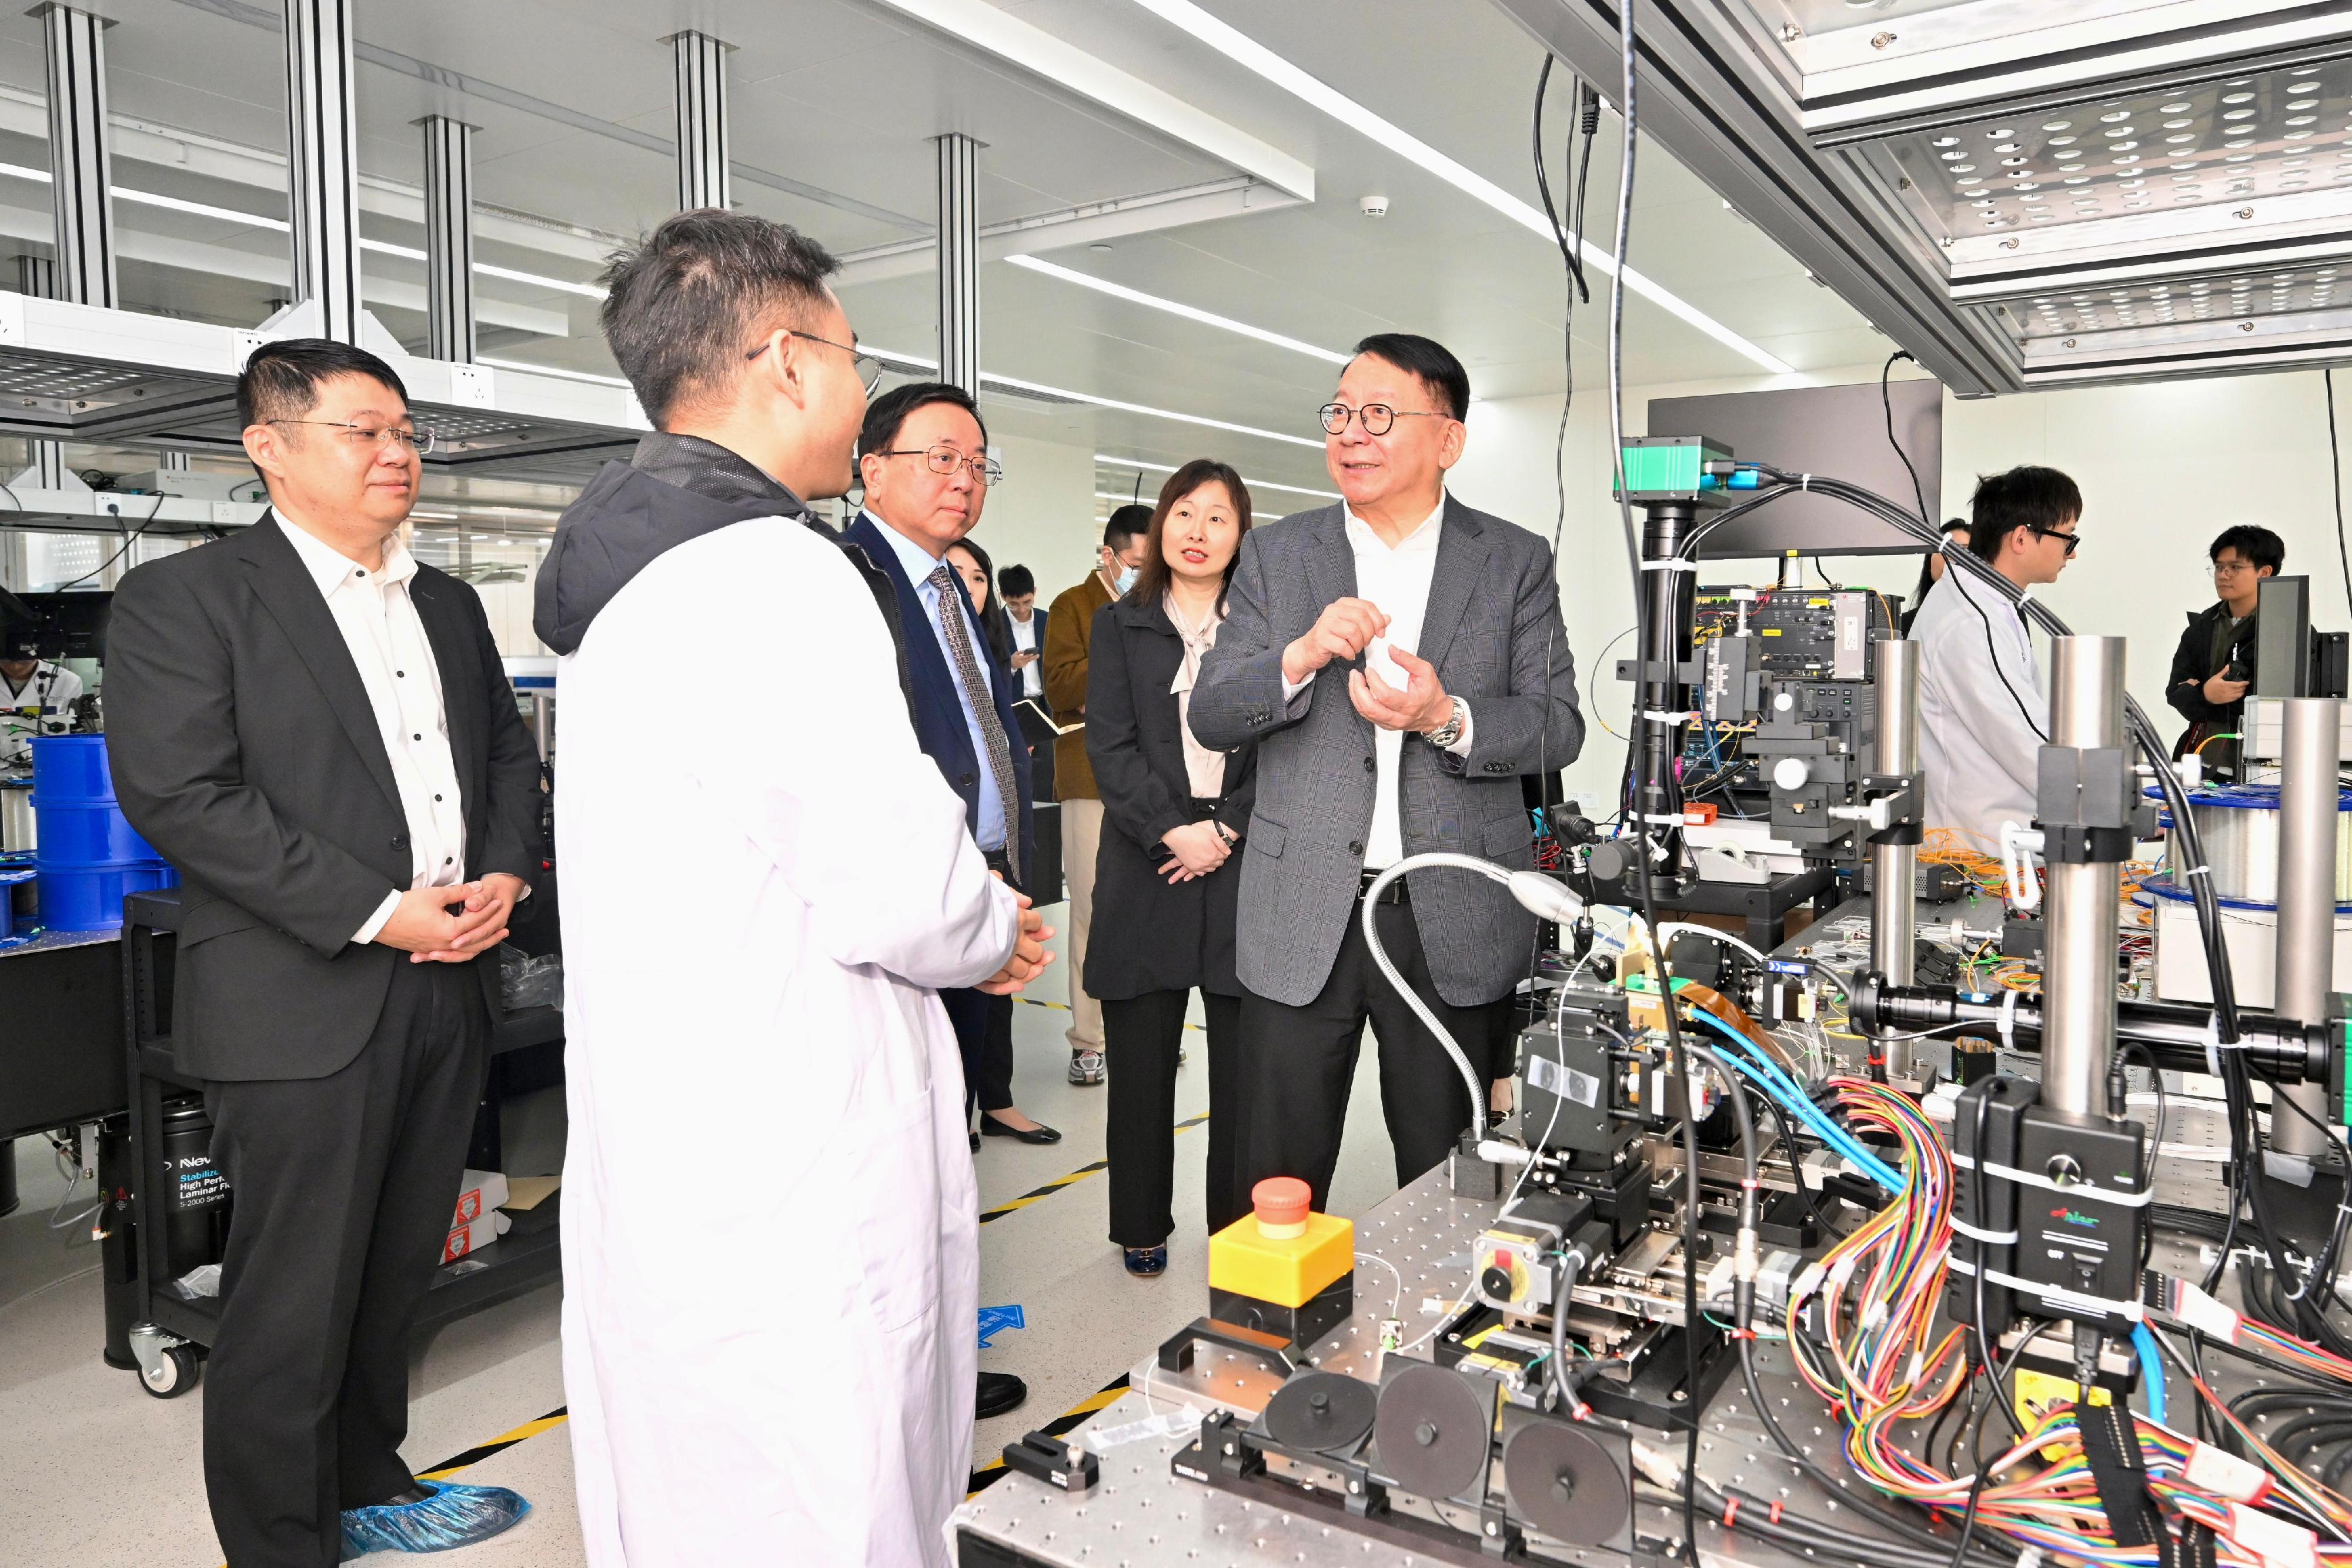 The Chief Secretary for Administration, Mr Chan Kwok-ki, continued his visit to Mainland cities of the Guangdong-Hong Kong-Macao Greater Bay Area in Guangzhou and Huizhou today (January 9). Photo shows Mr Chan (first right), accompanied by the President of the Hong Kong University of Science and Technology (Guangzhou), Professor Lionel Ni (third left), touring the Novel IC Exploration Facility at the university in Nansha, Guangzhou.